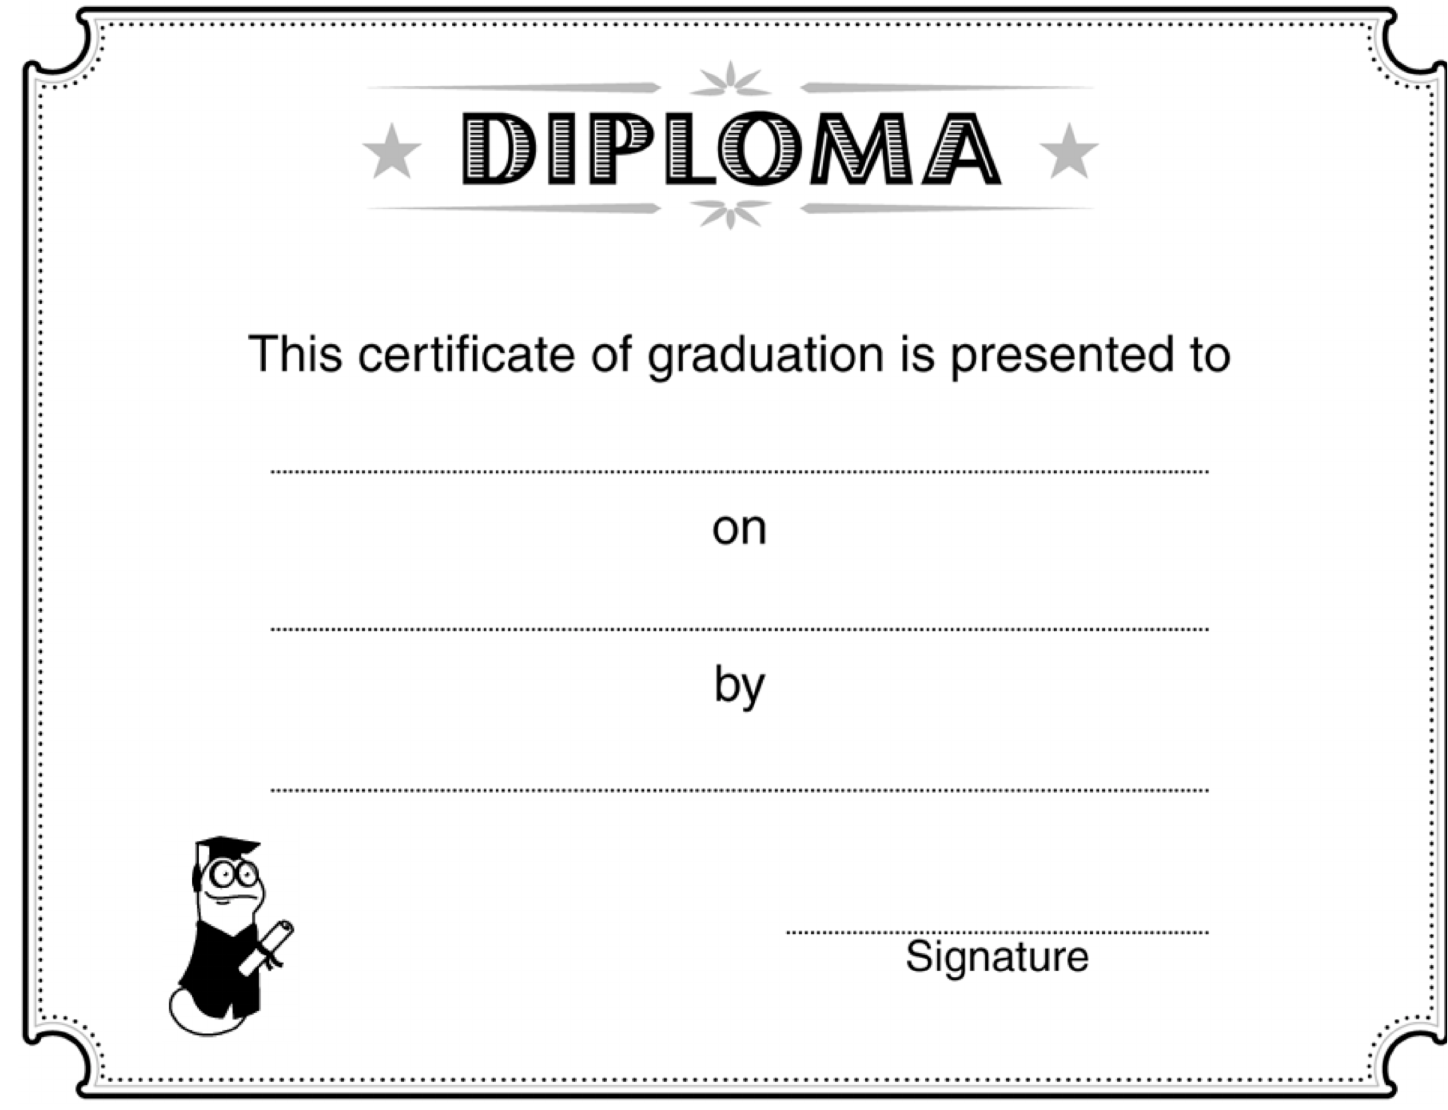 free-diploma-docx-143kb-1-page-s